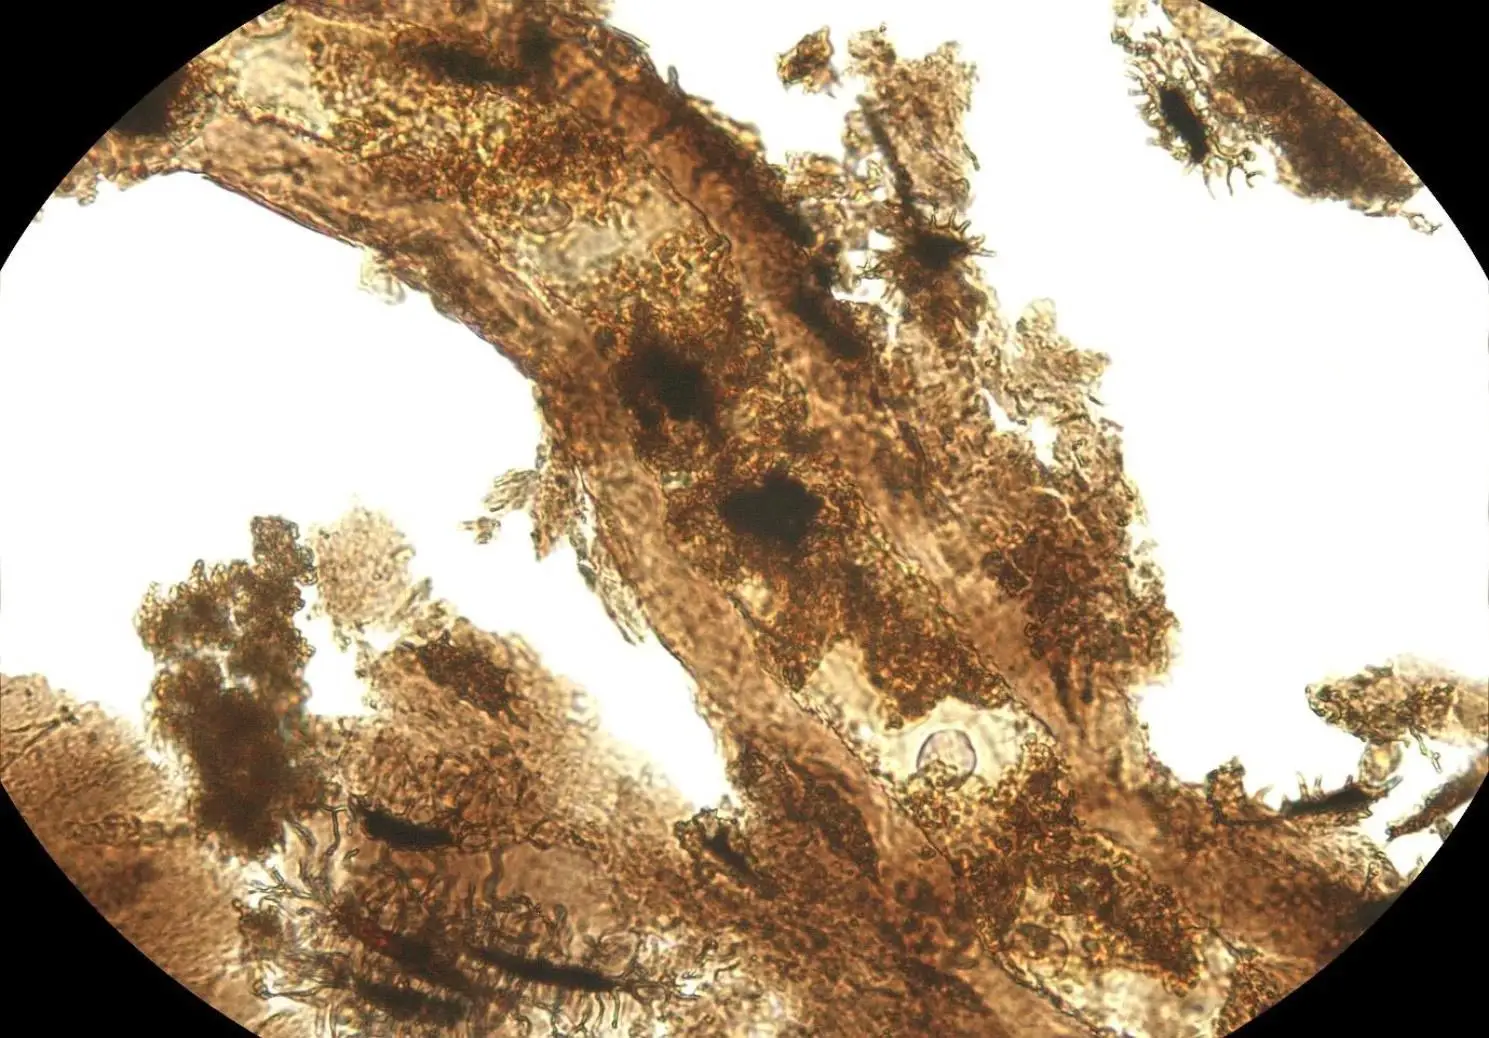 Paleoecology: runner-up. Paradoxical preservation. Microscopy reveals an extracted diplodocid dinosaur blood vessel. Credit: Dr. Jasmina Wiemann

